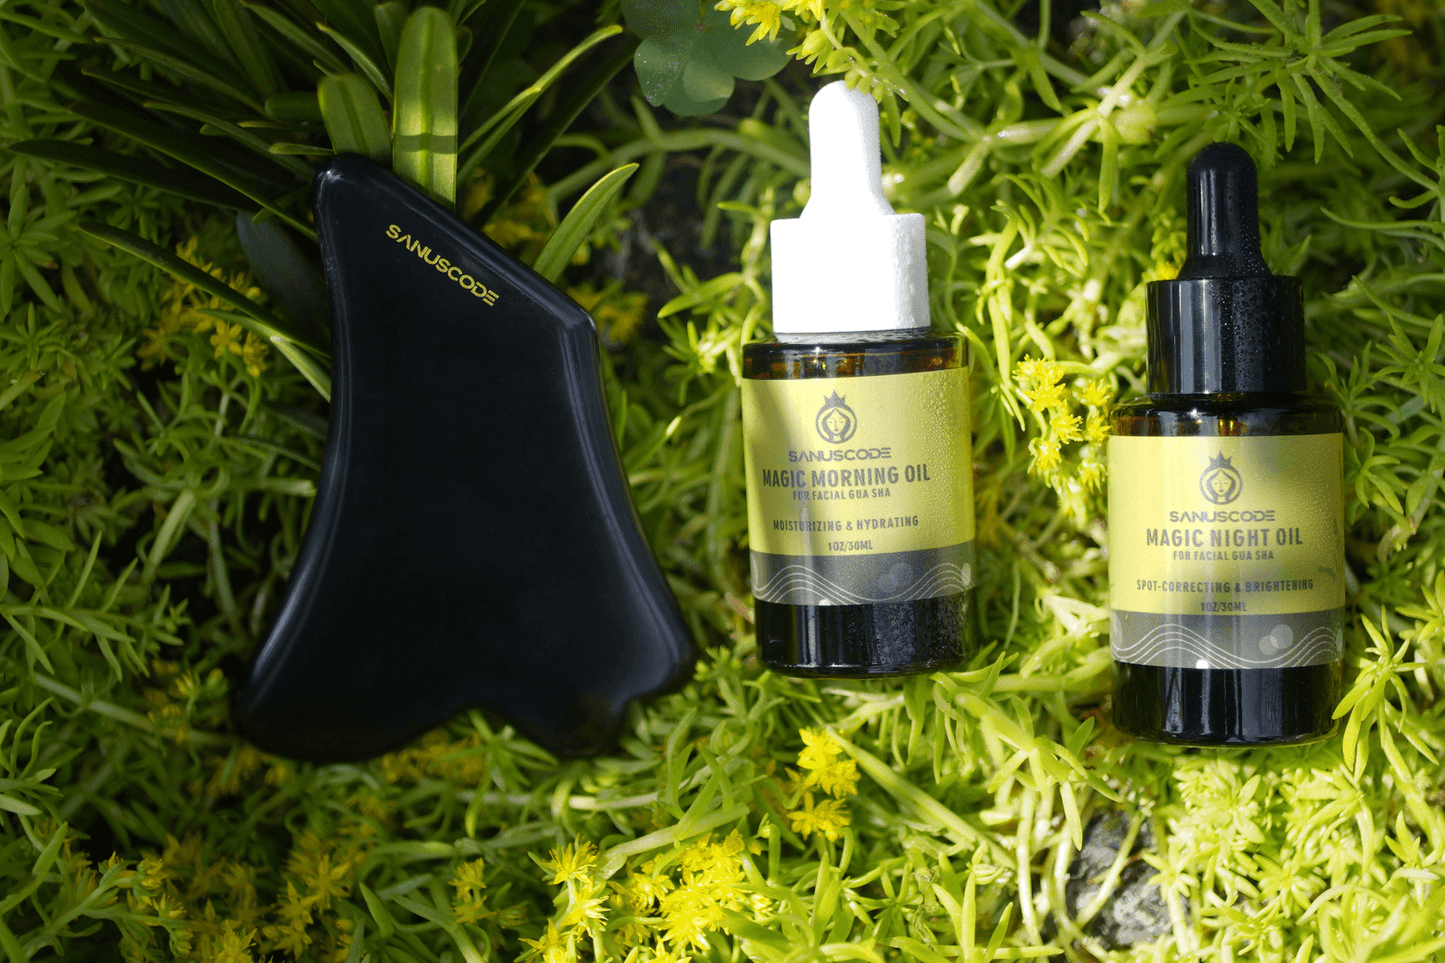 facial gua sha stone and oil set lay on green leaves with light shine on bottle